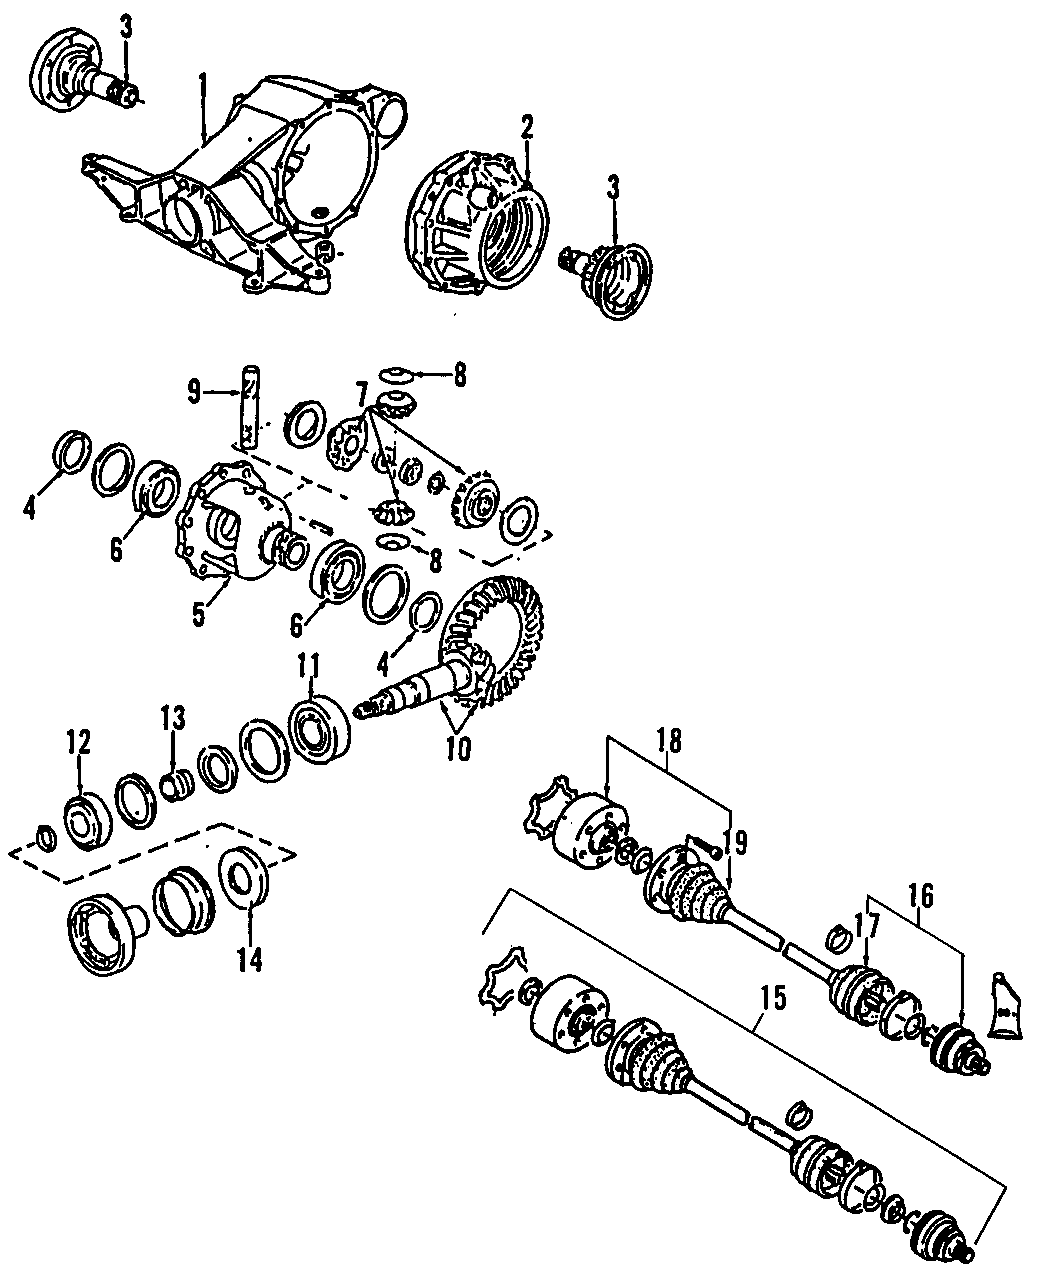 2DRIVE AXLES. REAR AXLE. AXLE SHAFTS & JOINTS. DIFFERENTIAL. PROPELLER SHAFT.https://images.simplepart.com/images/parts/motor/fullsize/F208150.png